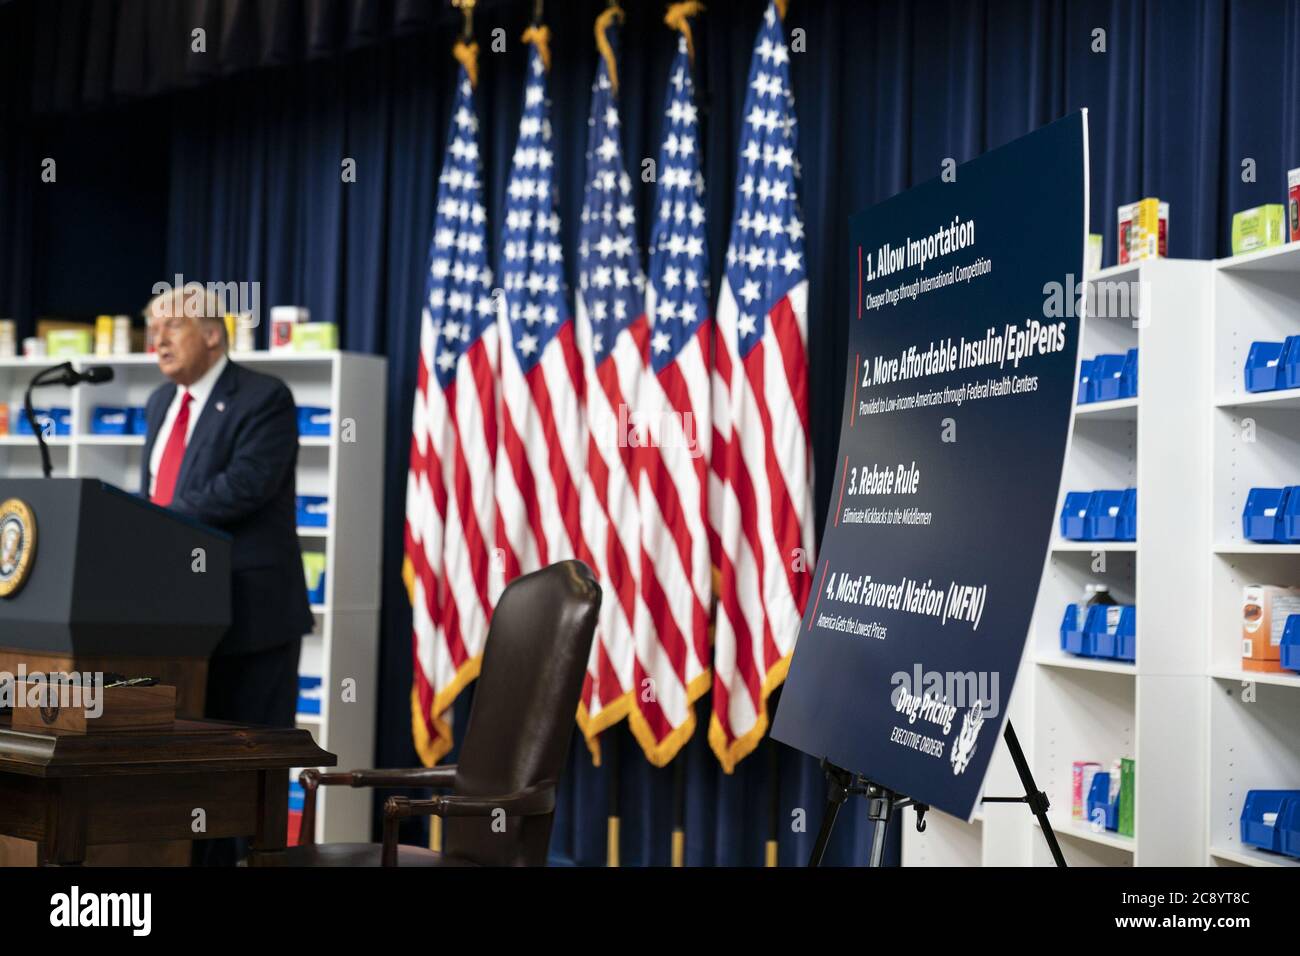 Washington, United States Of America. 24th July, 2020. President Donald J. Trump delivers remarks before signing Executive Orders on Lowering Drug Prices Friday, July 24, 2020, in the South Court Auditorium of the Eisenhower Executive Office Building at the White House People: President Donald Trump Credit: Storms Media Group/Alamy Live News Stock Photo